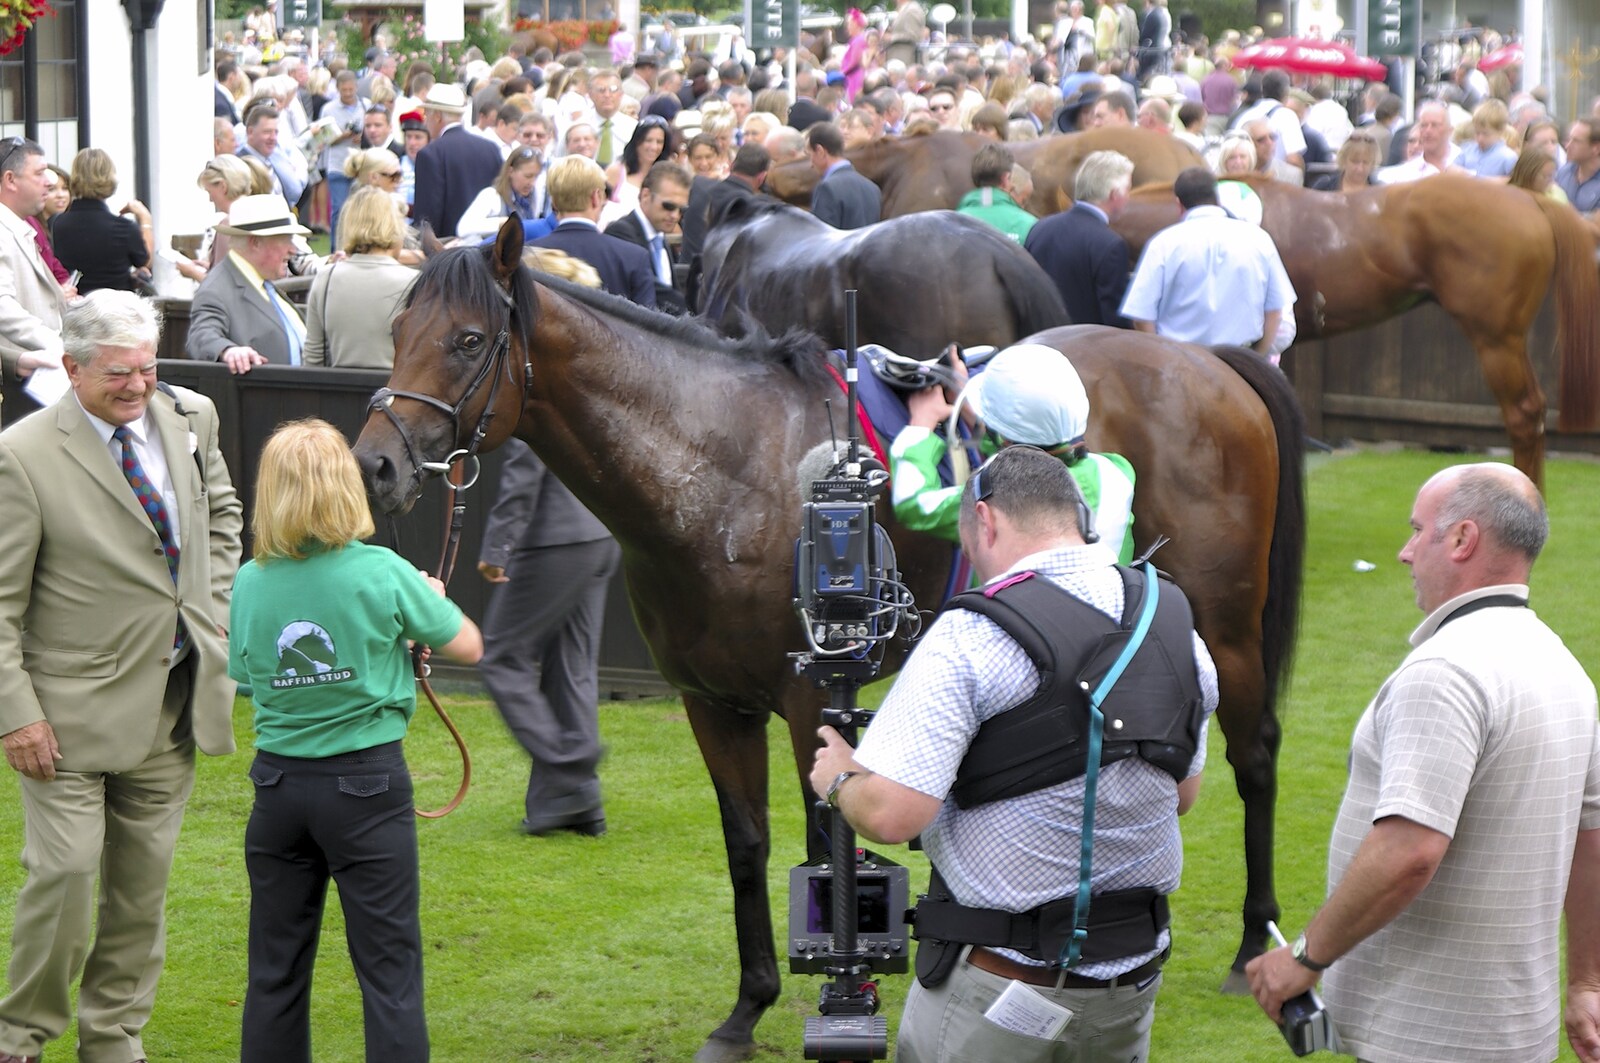 A sweaty horse is filmed from A Day At The Races, Newmarket, Suffolk - 23rd August 2008